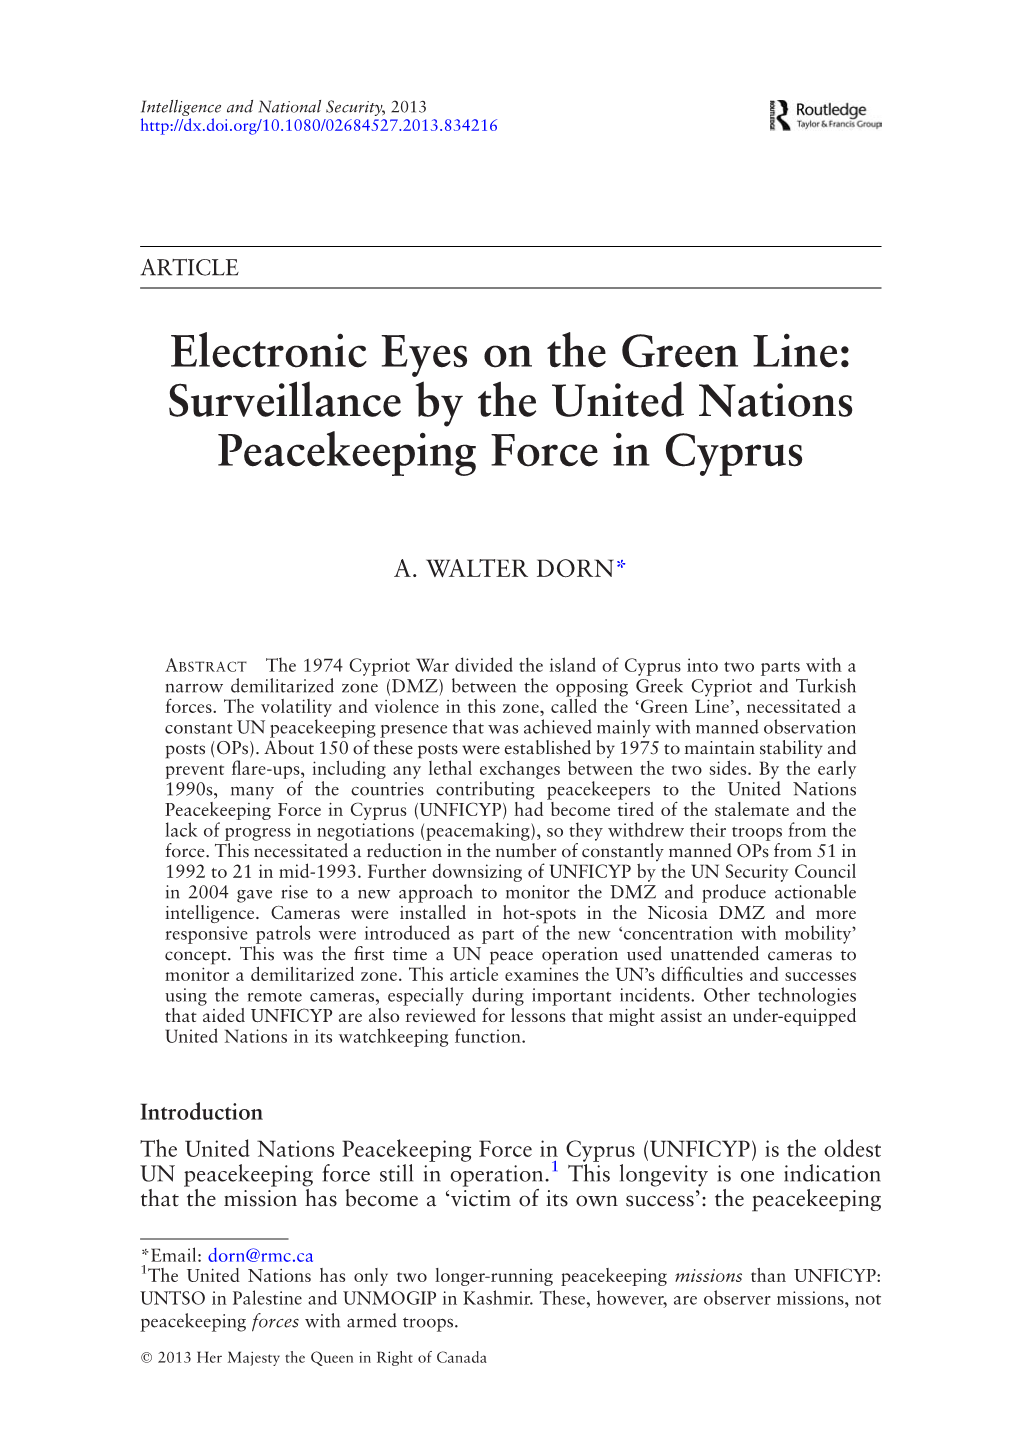 Surveillance by the United Nations Peacekeeping Force in Cyprus